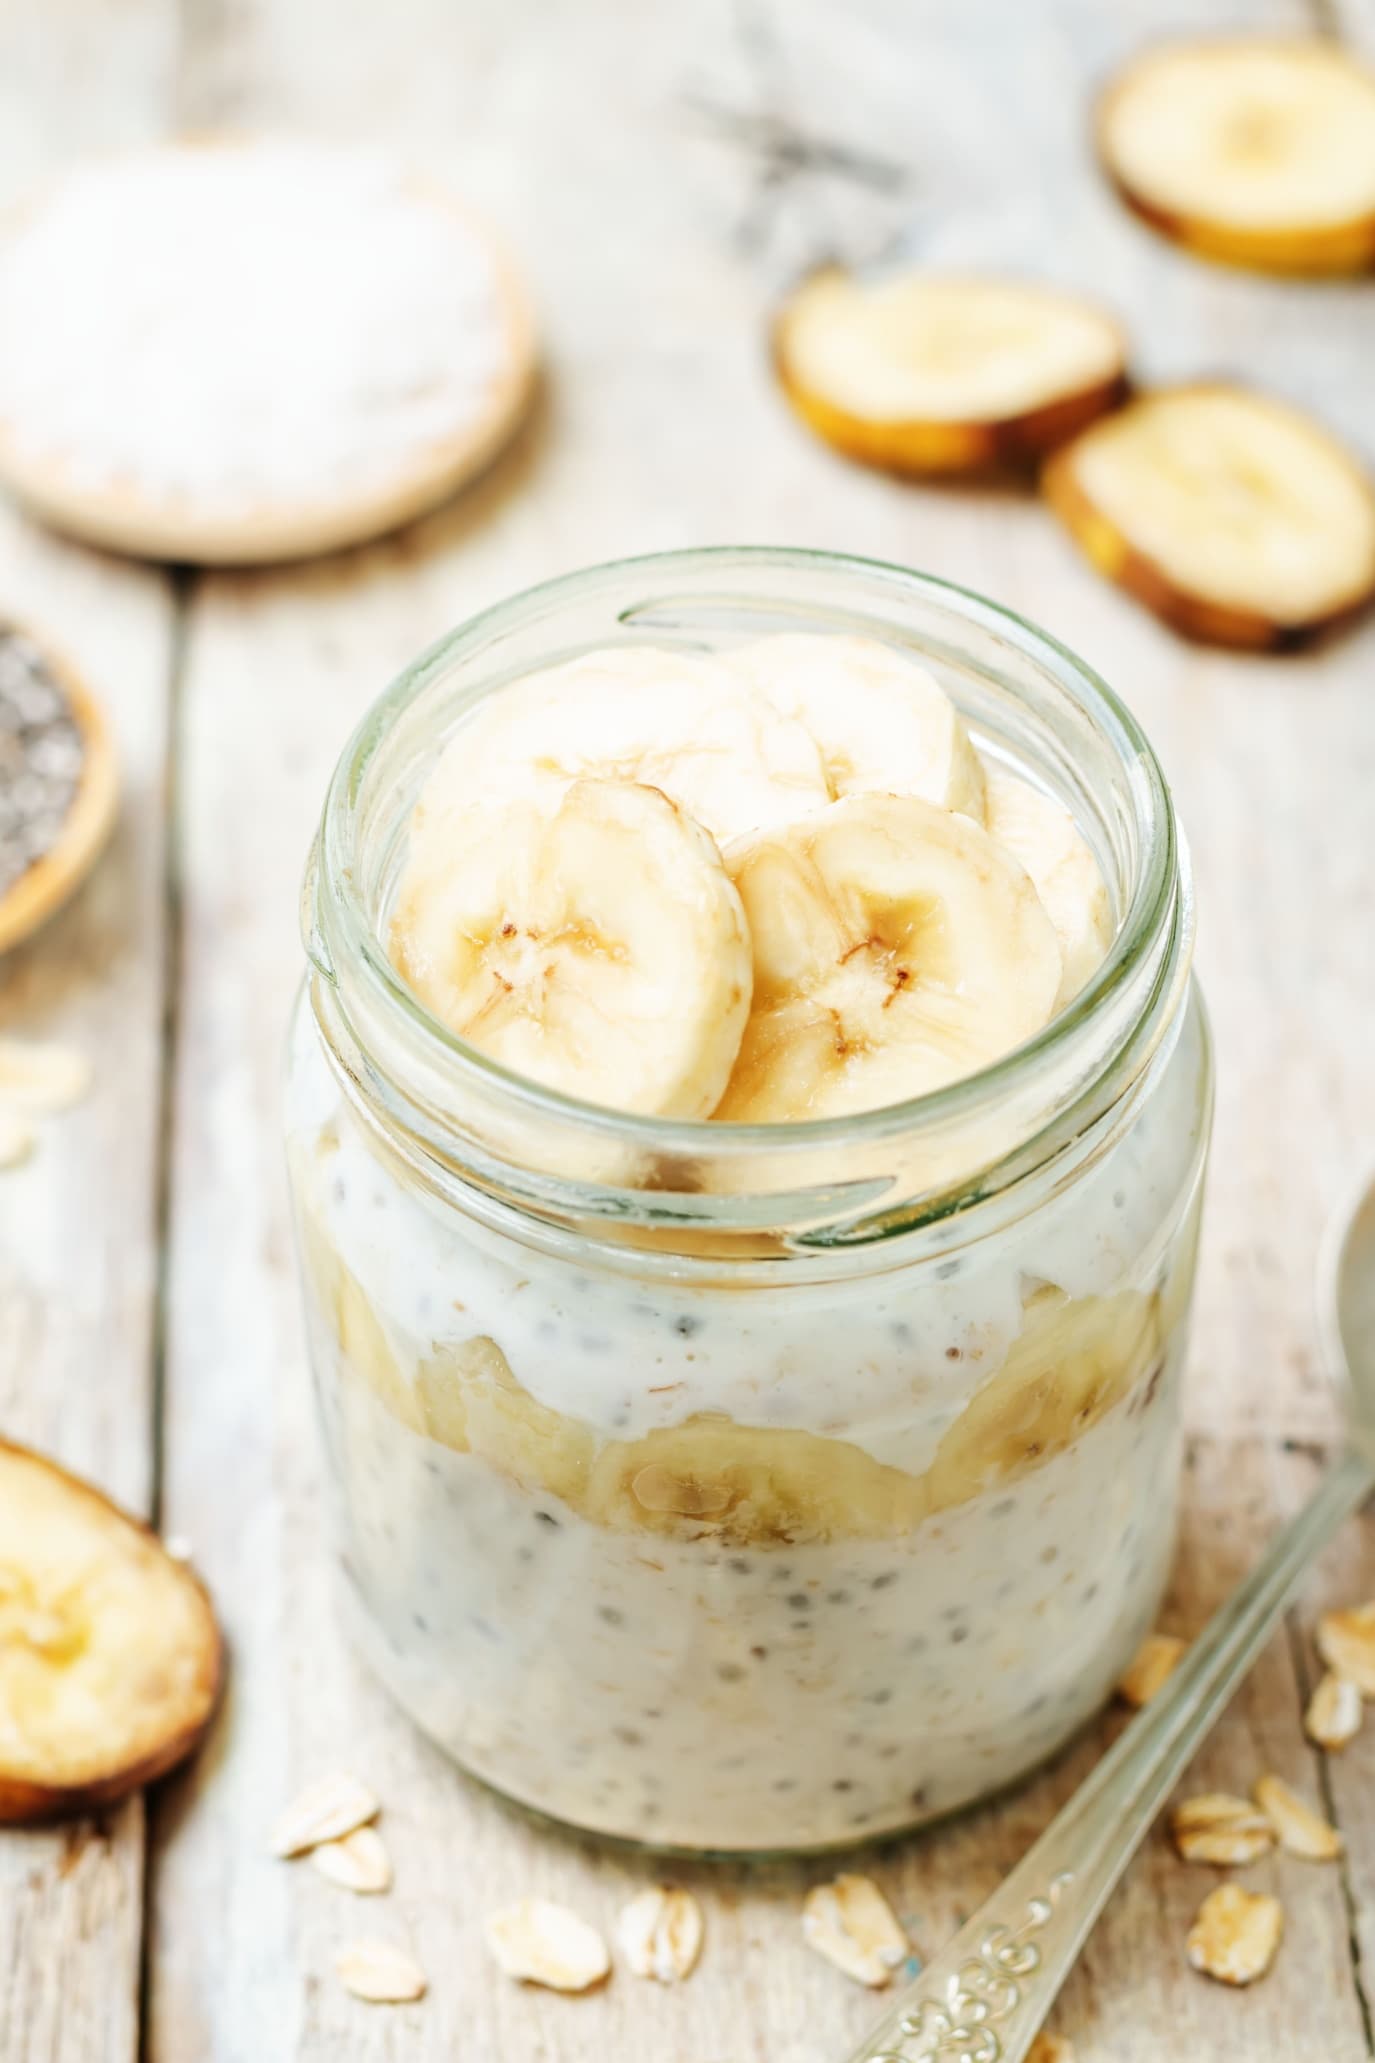 A jar of overnight oats with banana and chia seeds, set on a rustic wooden table. The foreground shows a clear glass jar layered with creamy oats speckled with tiny, black chia seeds, topped with several round slices of ripe banana. In the background, there's a blurred view of a whole banana cut in half and some scattered oats. The golden tones of the wood and the soft, natural light lend a cozy, inviting feel to this nutritious breakfast option for toddlers.